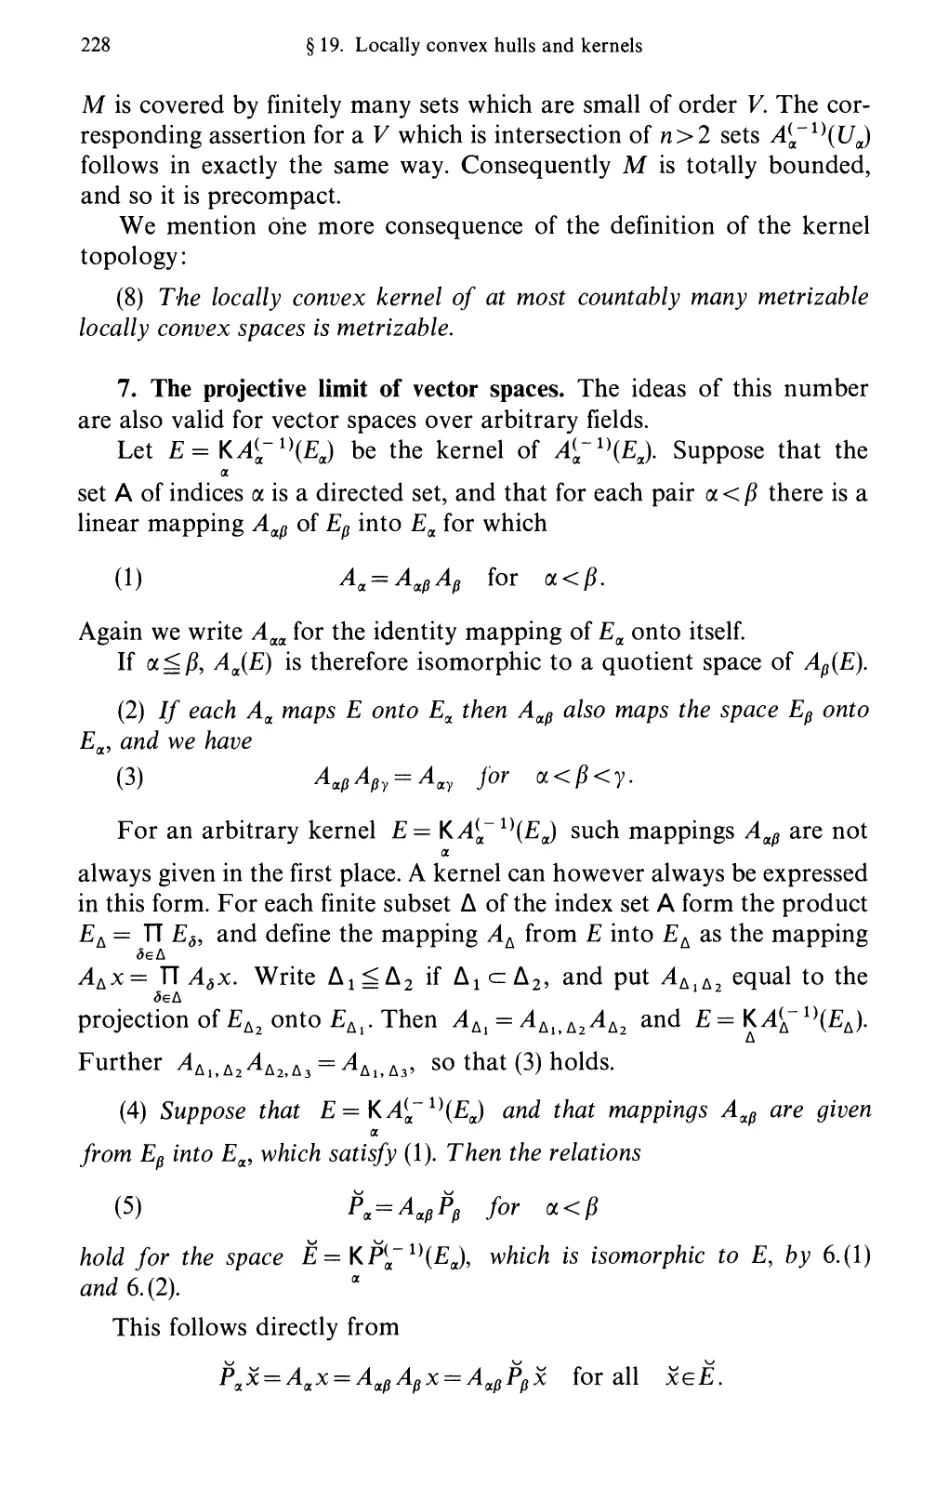 7. The projective limit of vector spaces